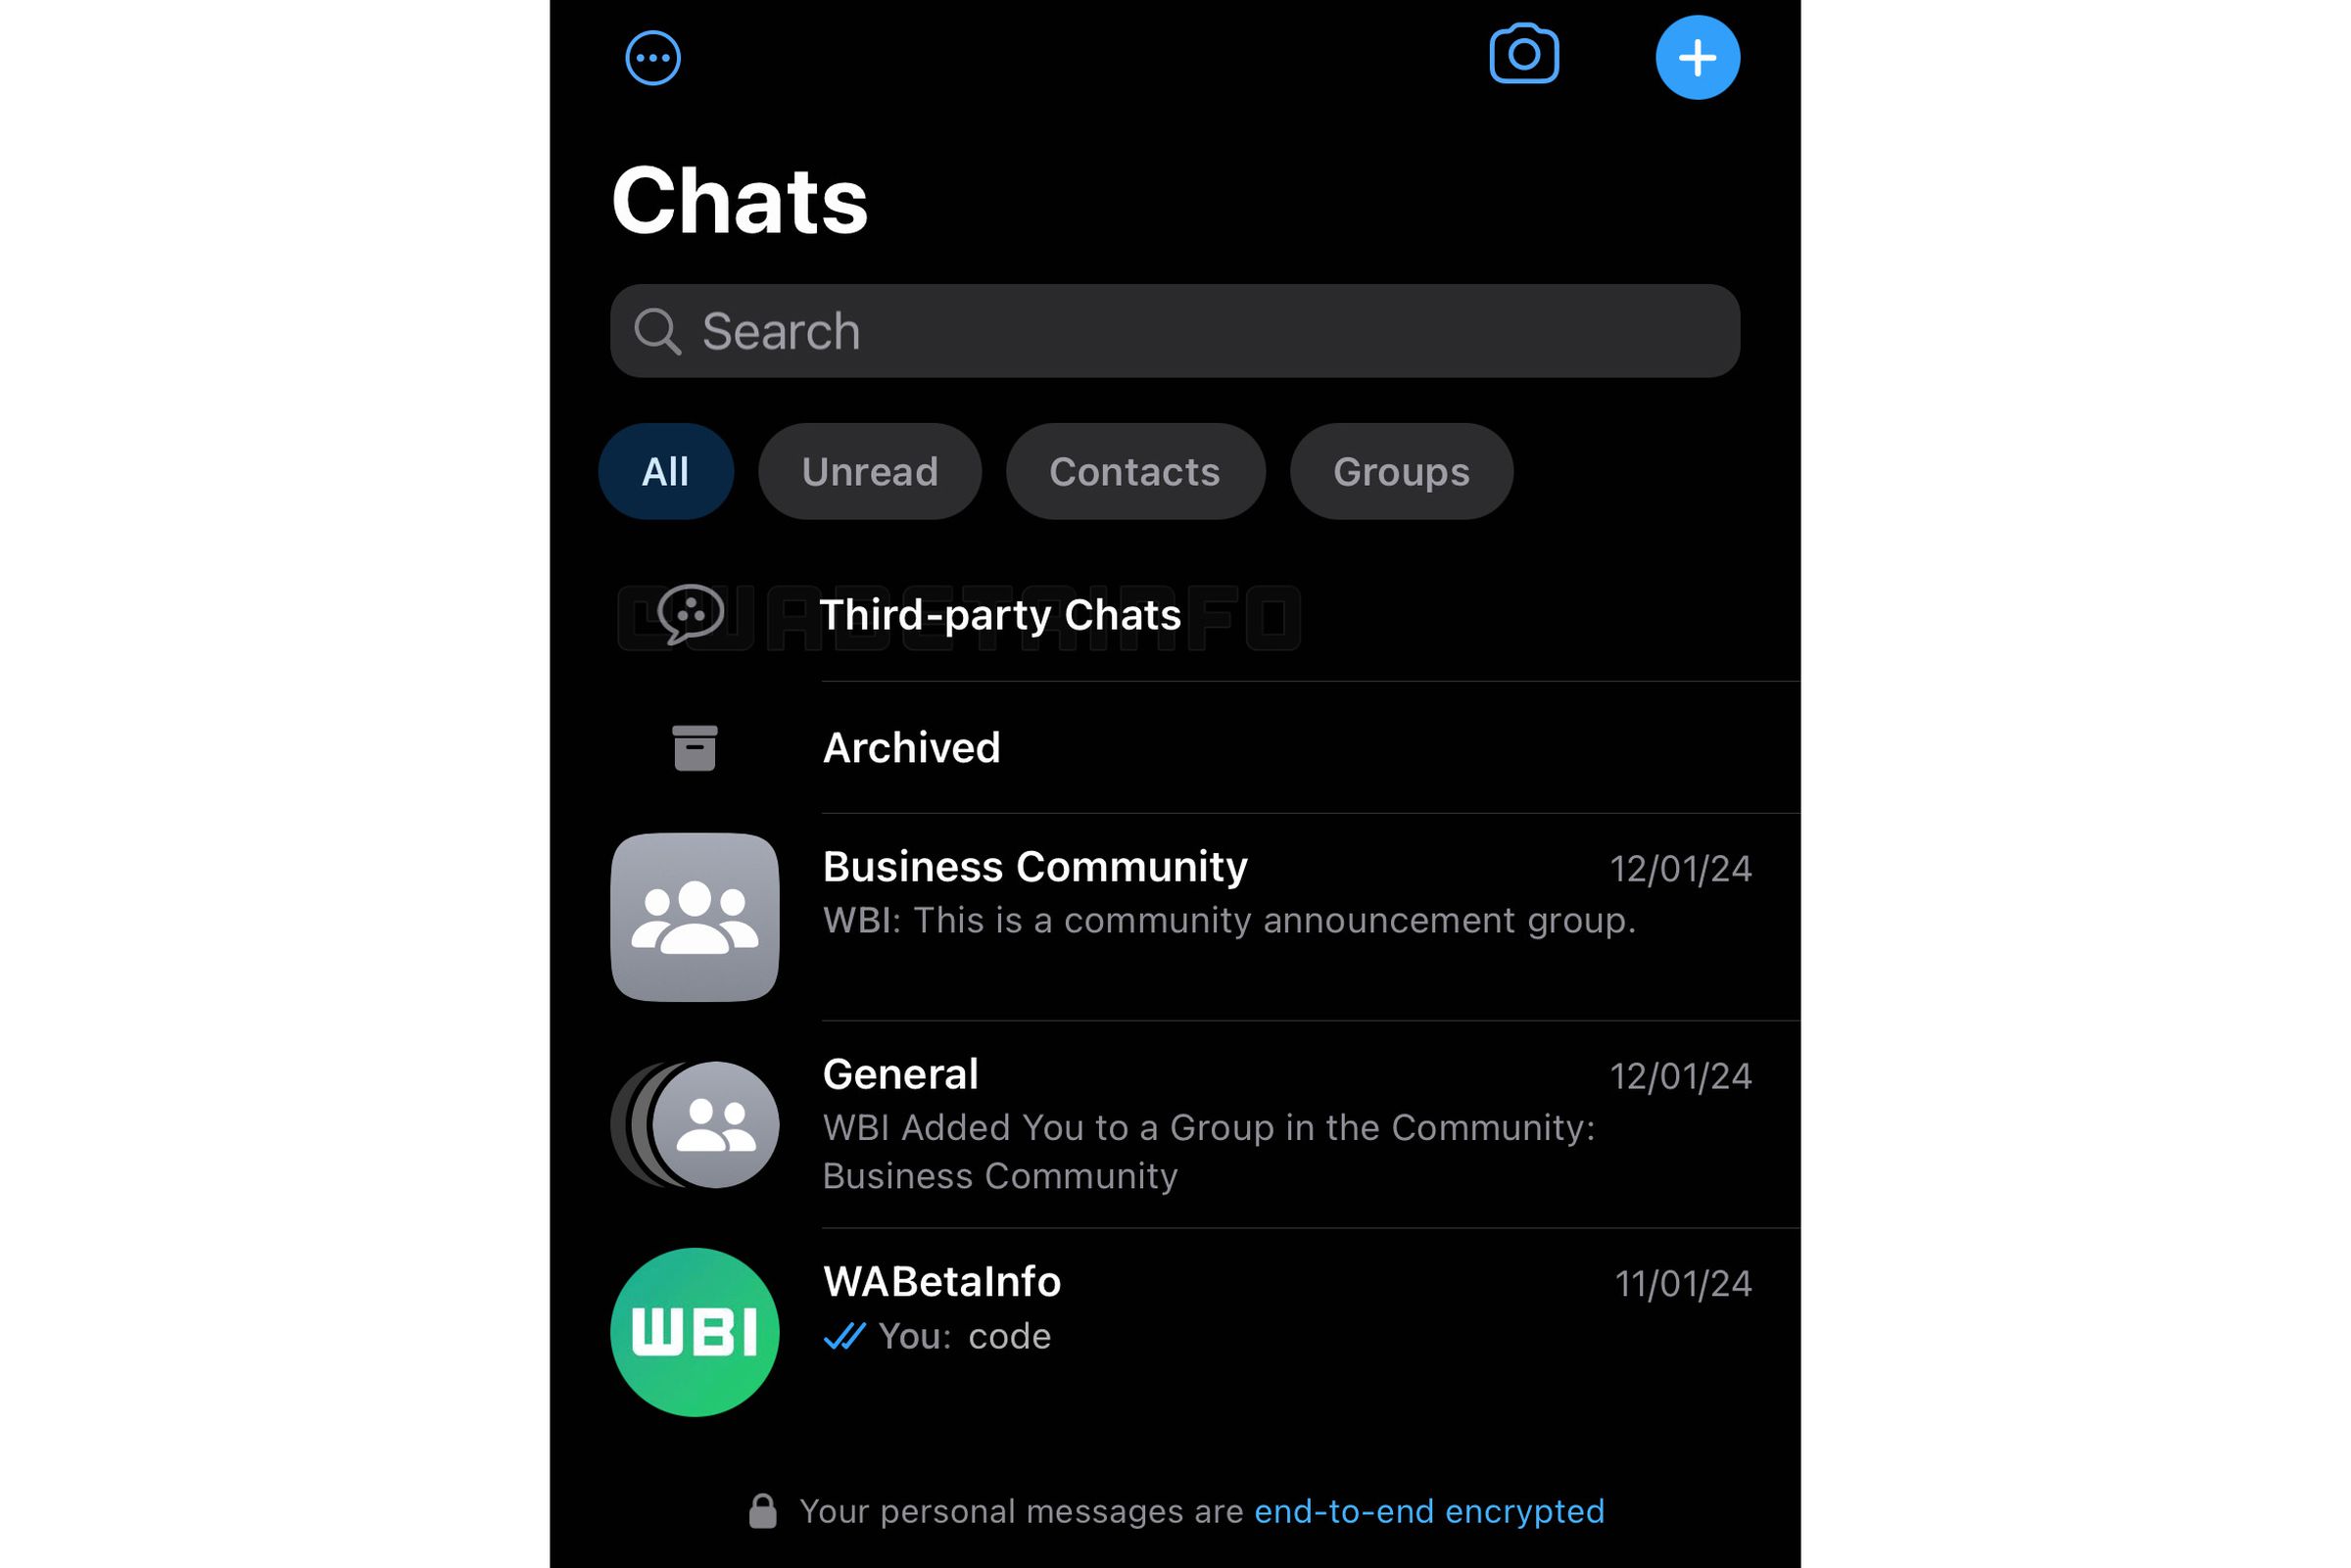 A screenshot of WhatsApp’s iOS app showing “Third-party chats” in a menu.